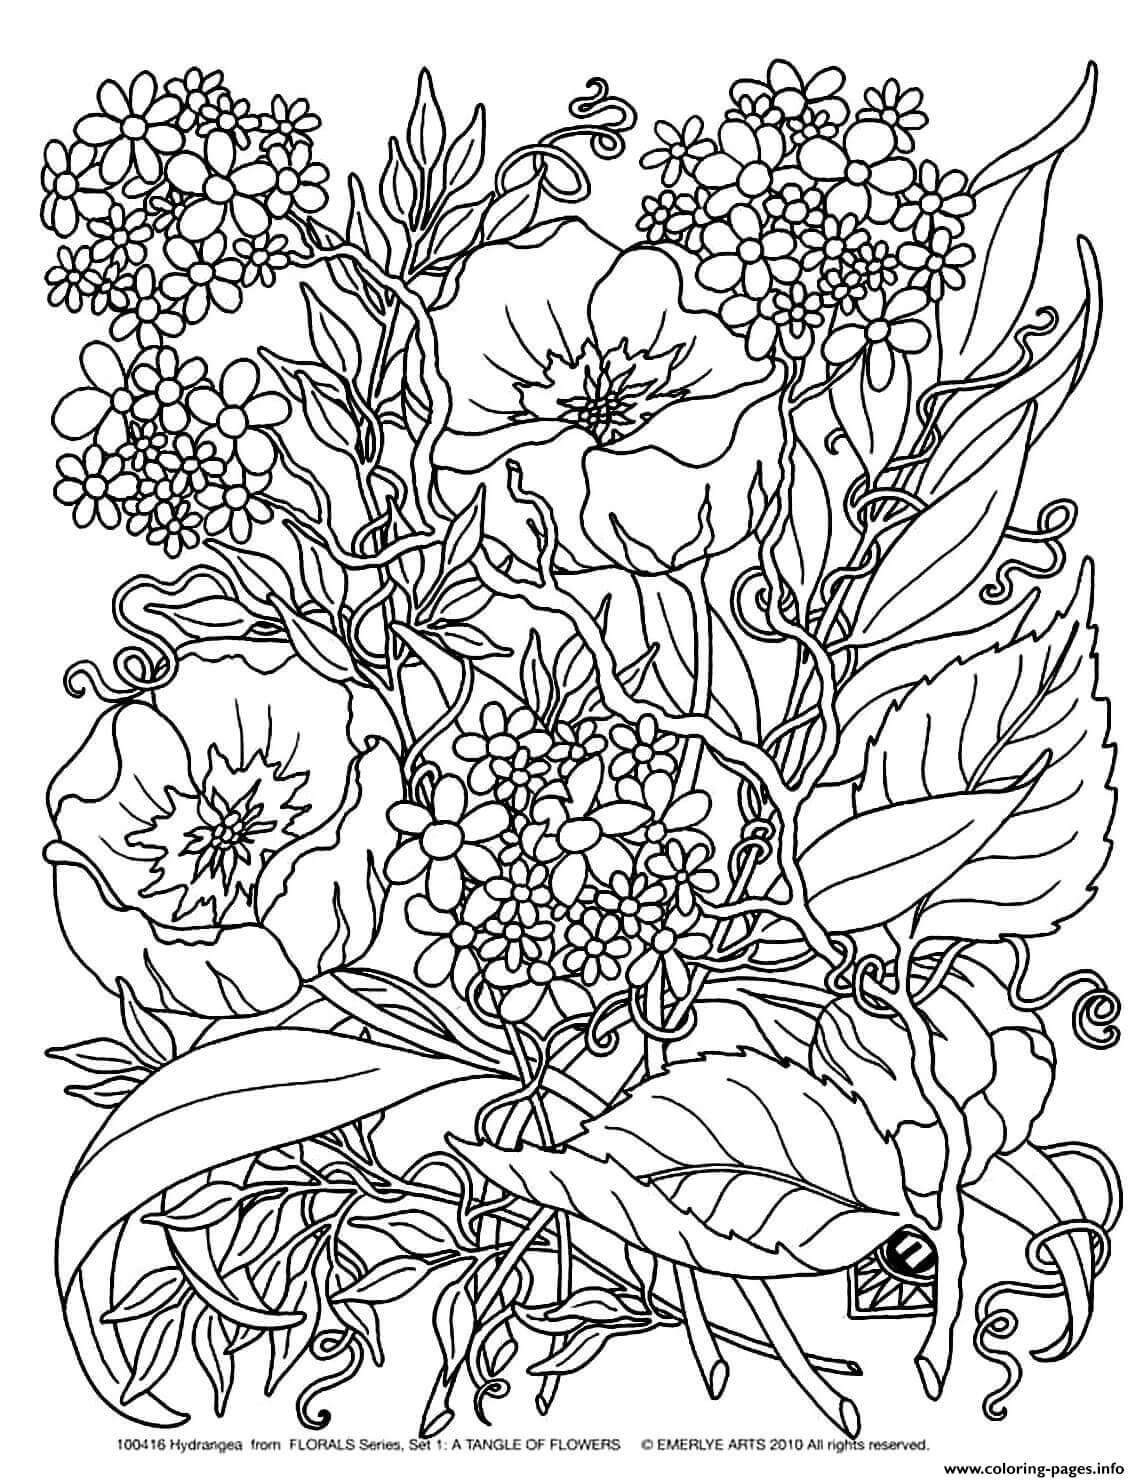 flower coloring pages printable | flower coloring pages for adults | flower coloring pages for adults